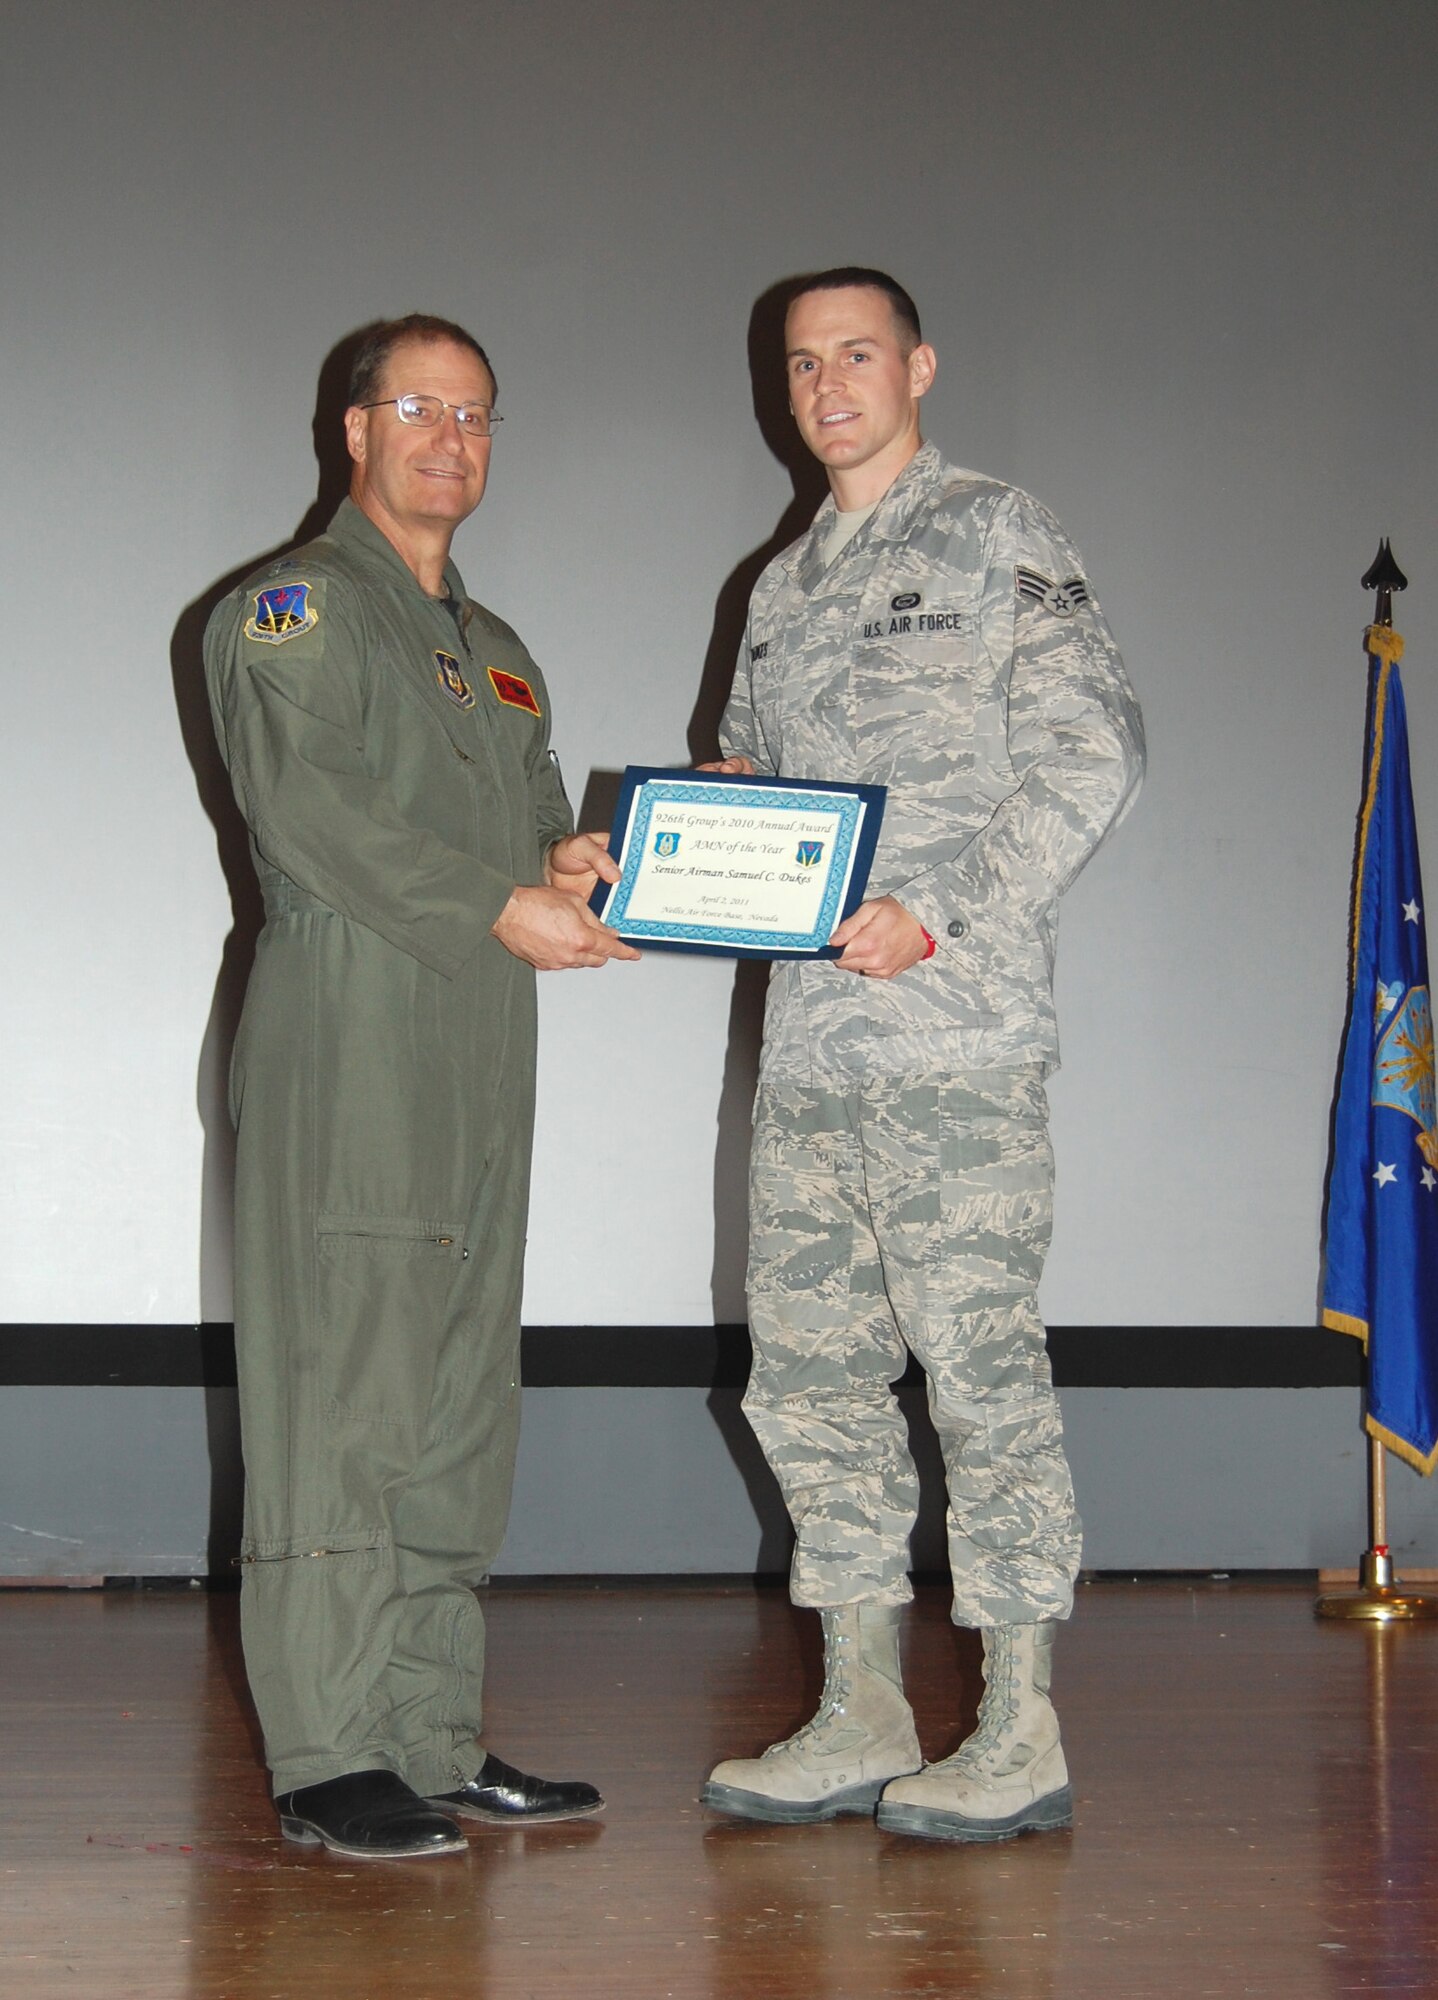 NELLIS AIR FORCE BASE, Nev. -- (Right) Senior Airman Samuel Dukes is recognized as the 926th Group's 2010 Airman of the Year by Col. Herman Brunke, 926th GP commander, during a commander's call here April 2. (U.S. Air Force photo/Capt. Jessica Martin)